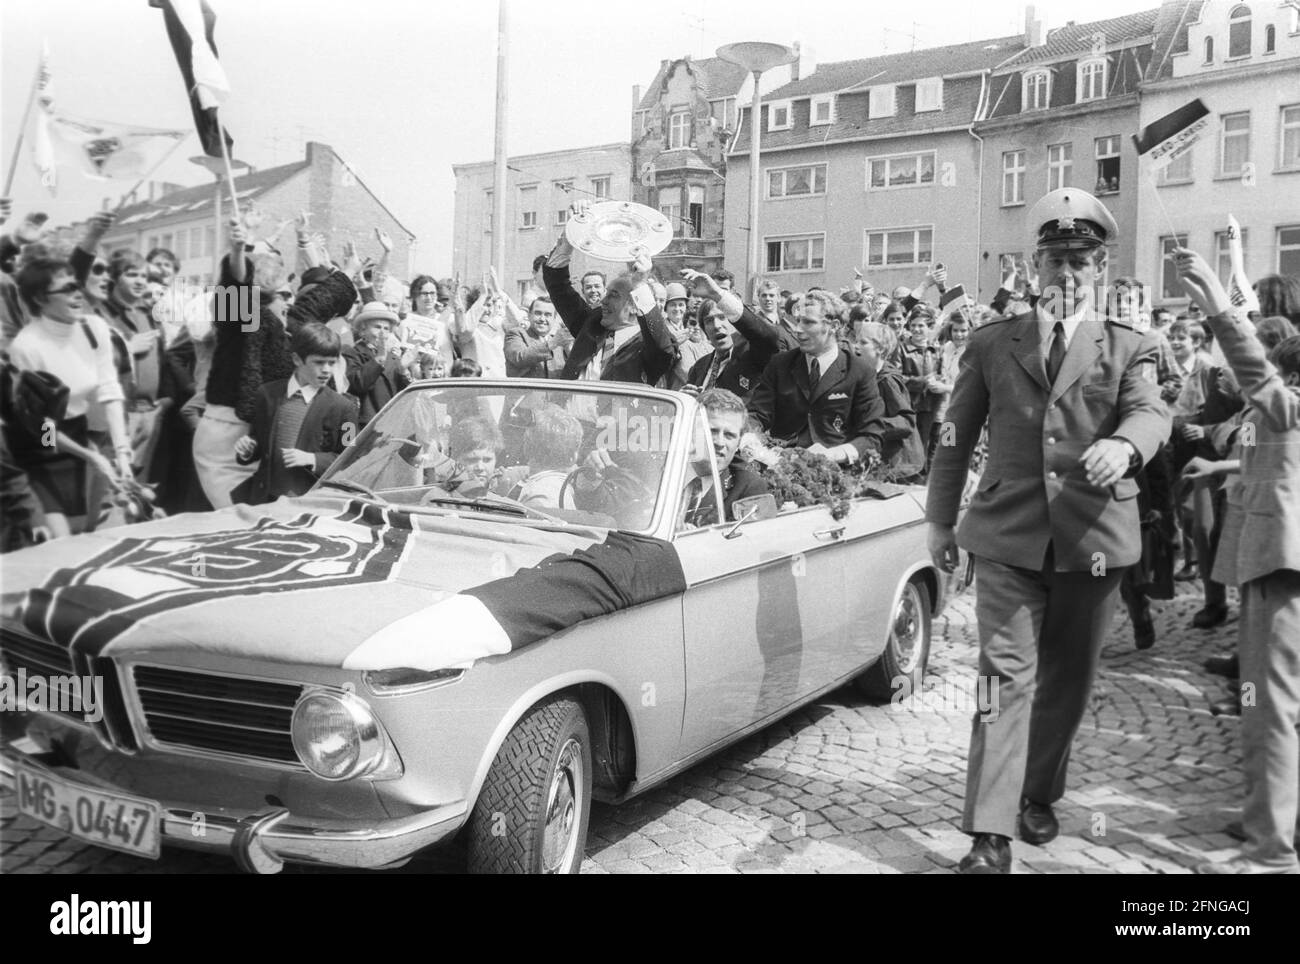 VFL Borussia Mönchengladbach German Football Champion 1969/70 during the drive through the city in the front of the car from the left coach Hennes Weisweiler, Günter Netzer and Berti Vogts with championship trophy.The motorcade is accompanied by many fans. Rec. 05.05.1970. [automated translation] Stock Photo